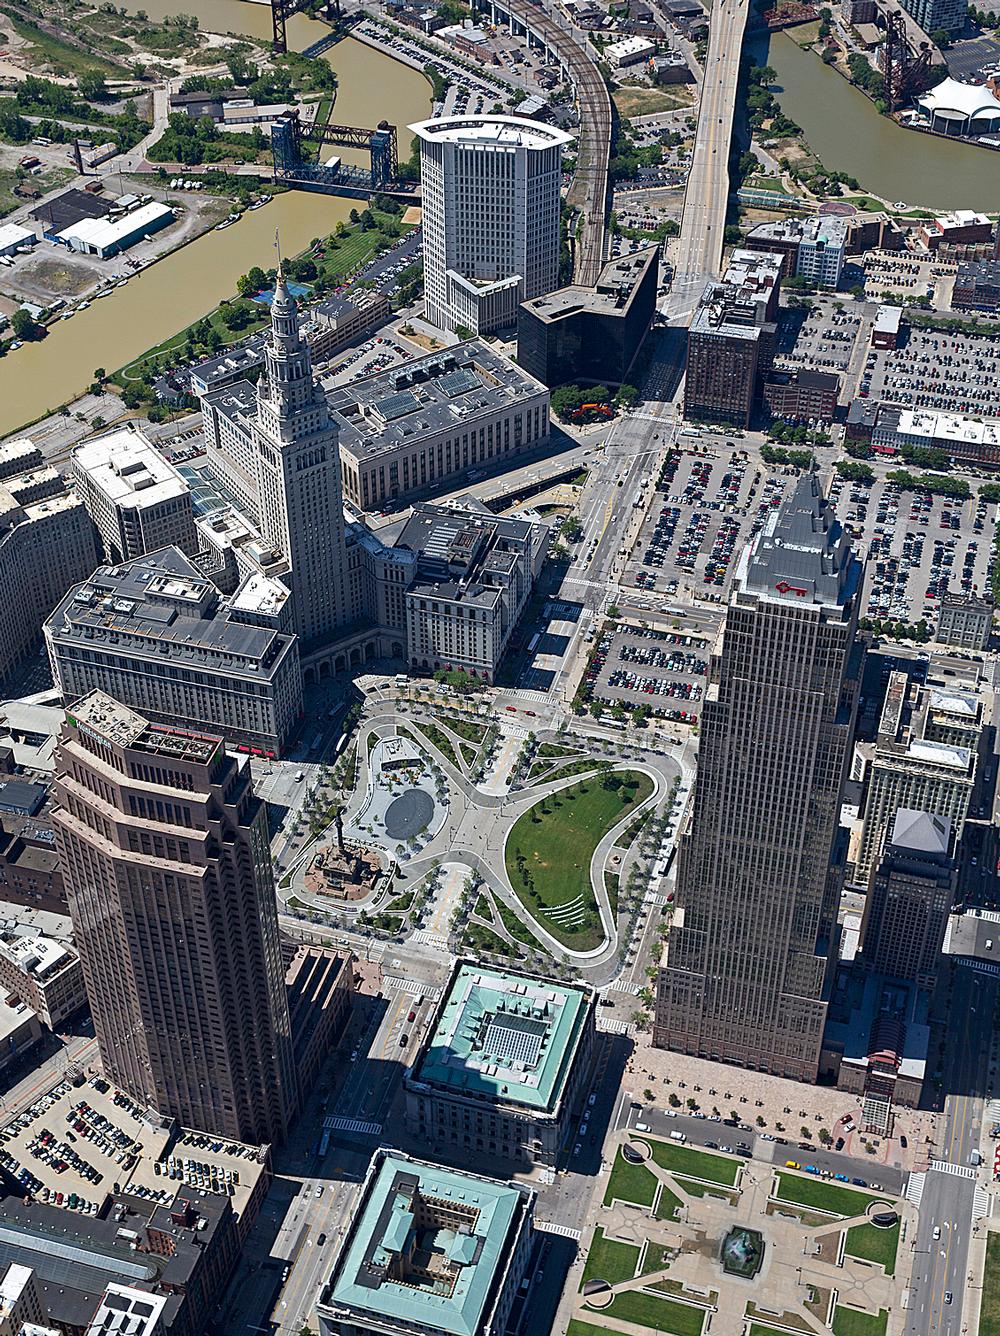 Cleveland’s Public Square features a new park by JCFO / Images courtesy of James Corner Field Architects